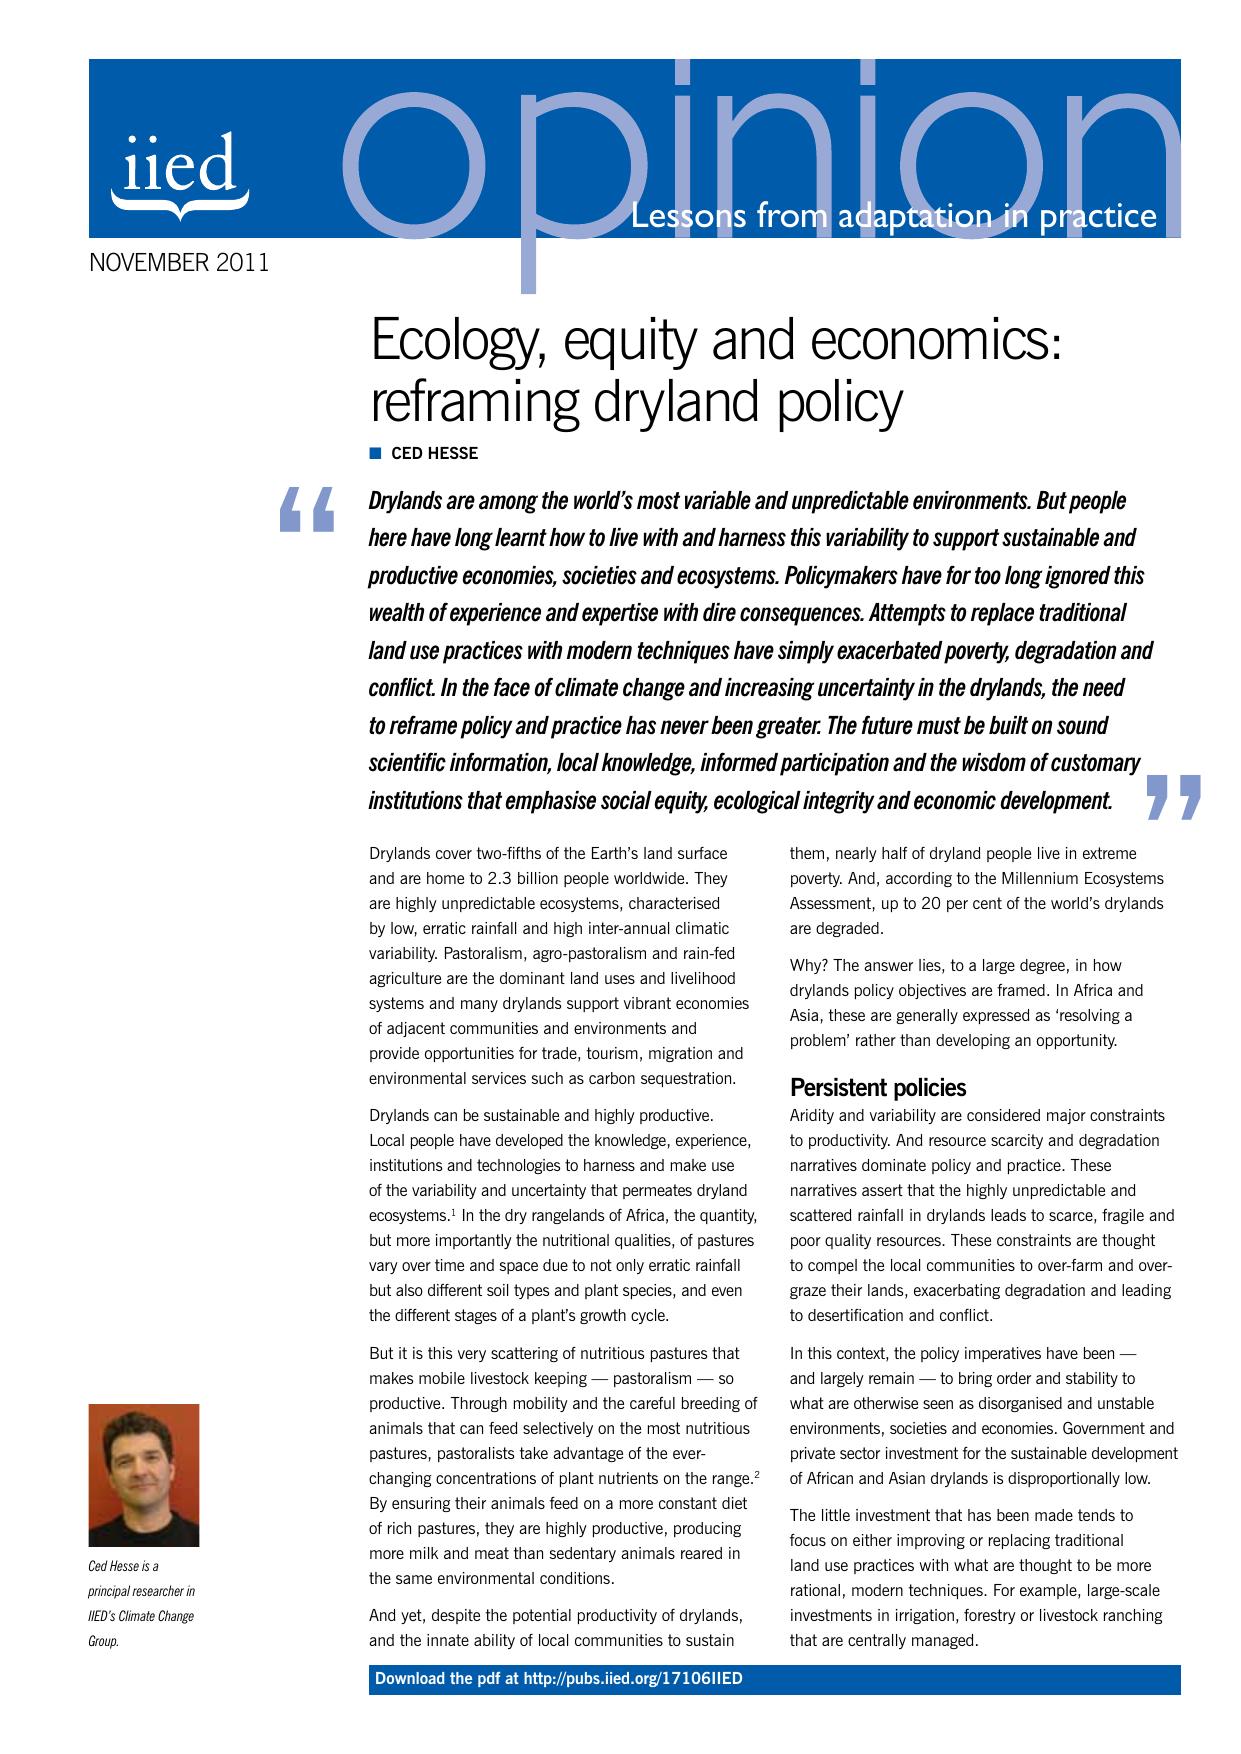 Ecology, equity and economics-reframing dryland policy. 2011